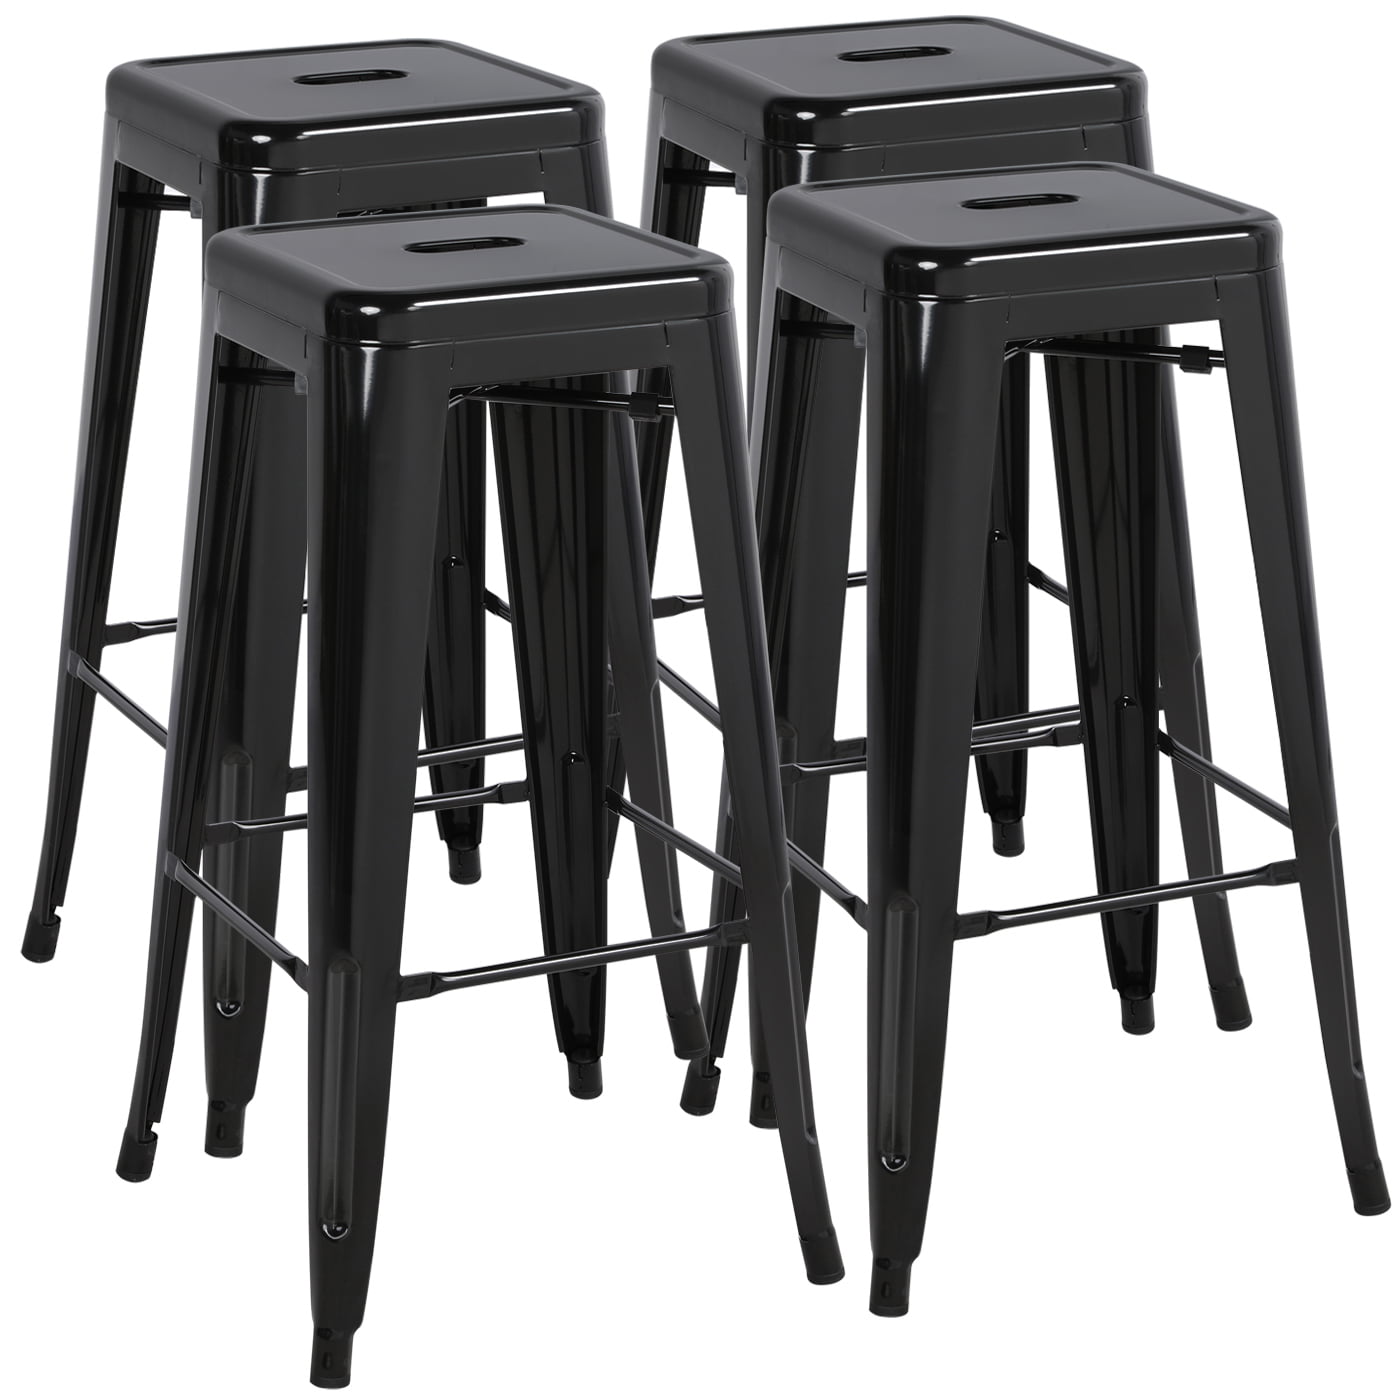 easyfashion 30'' high stackable metal bar stools kitchen dining bar chairs  backless set of 4 counter stool black  walmart